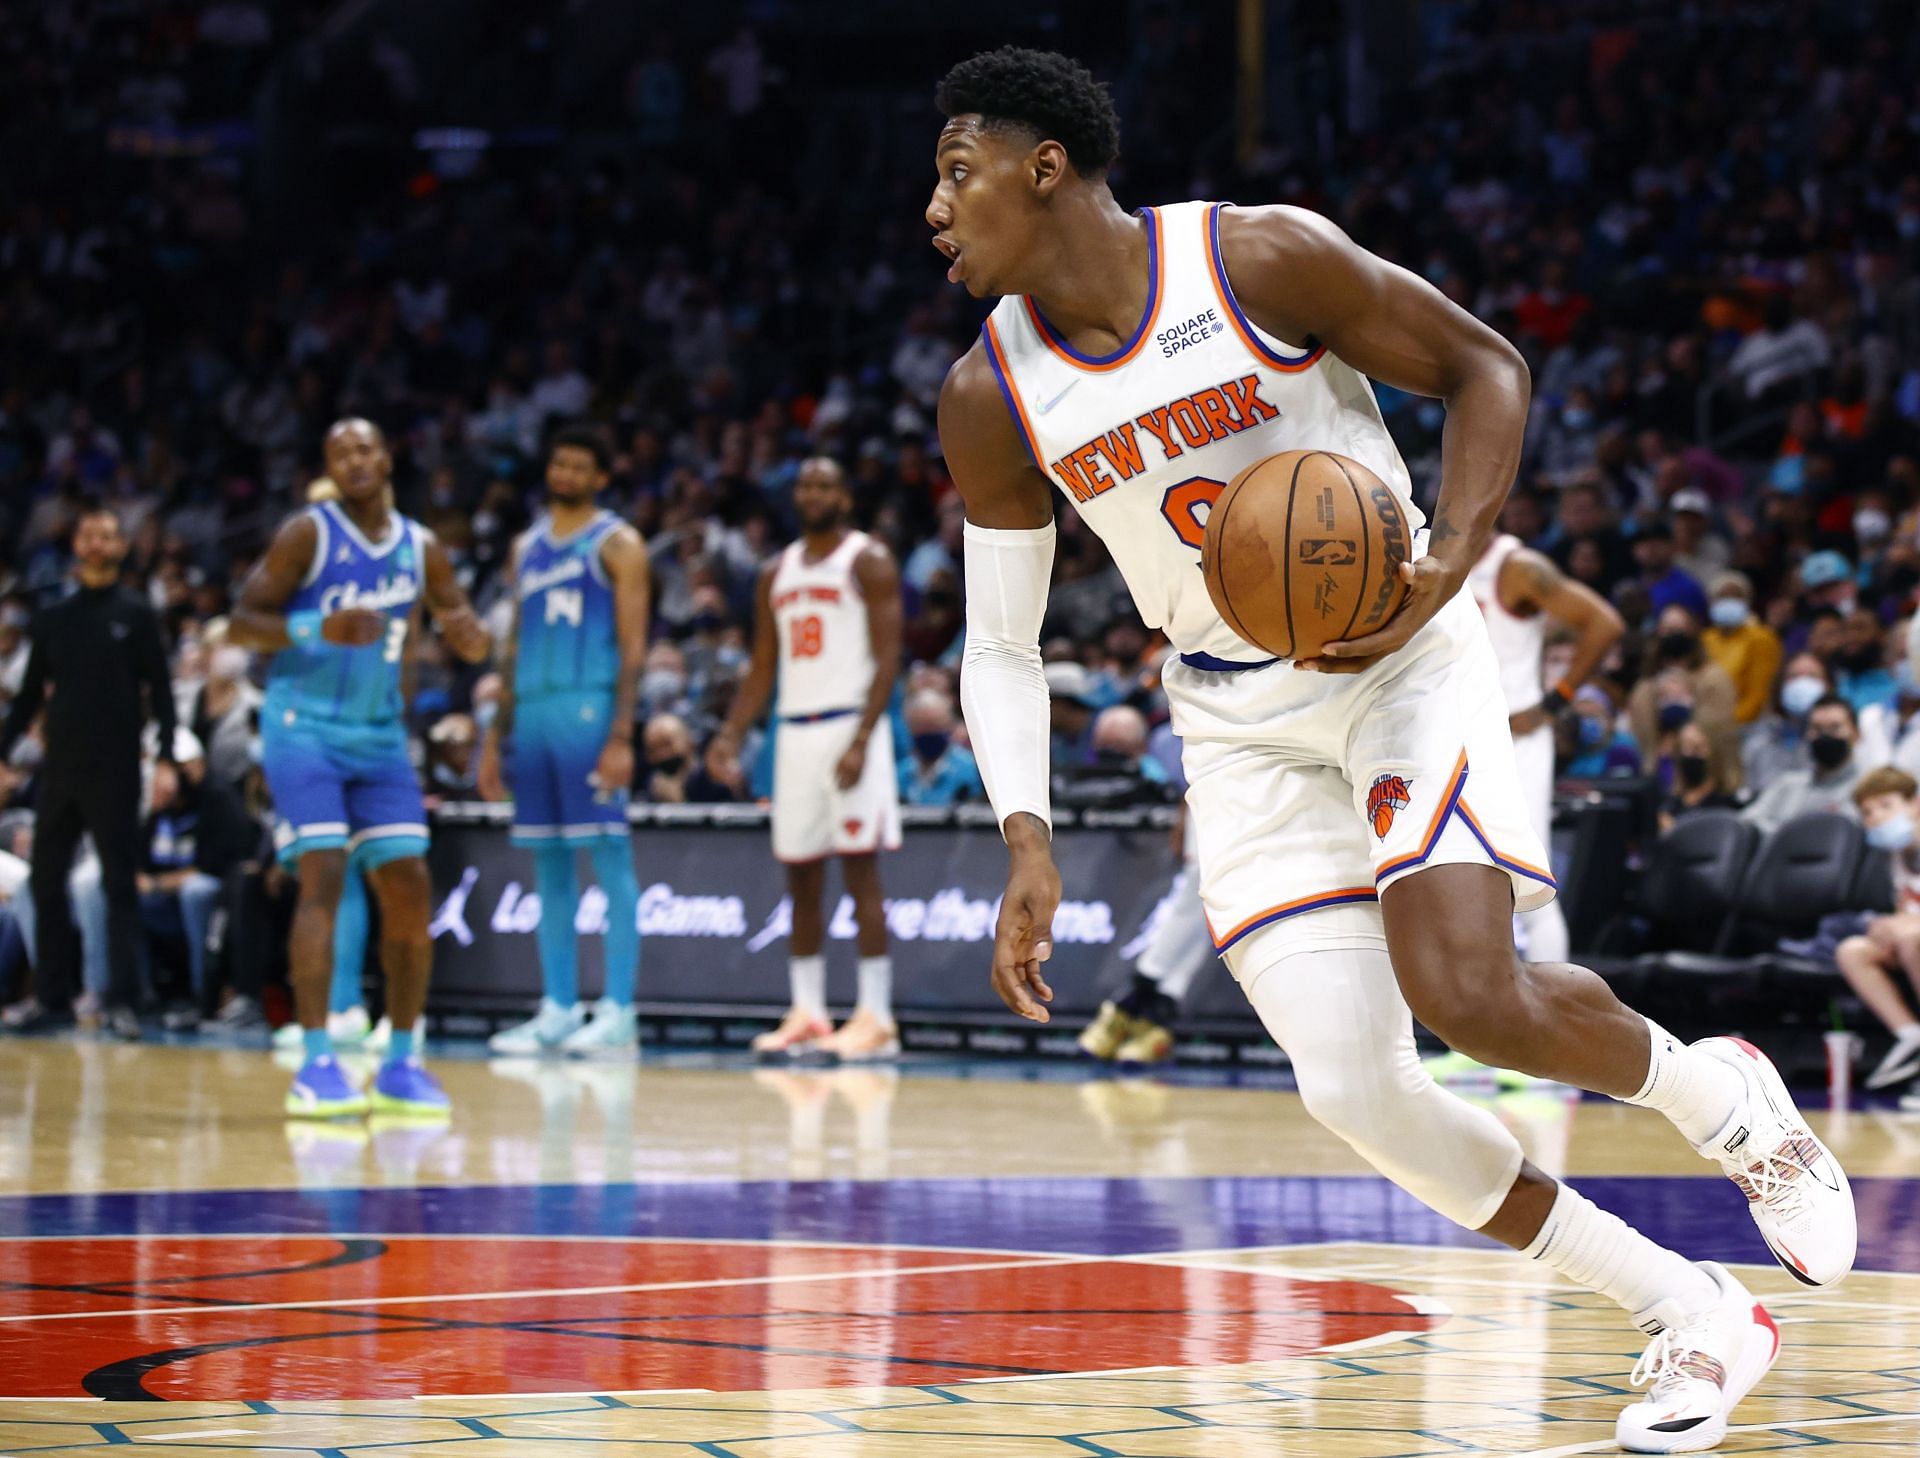 RJ Barrett of the New York Knicks dribbles during the second half of their game against the Charlotte Hornets at Spectrum Center on November 12, 2021 in Charlotte, North Carolina.